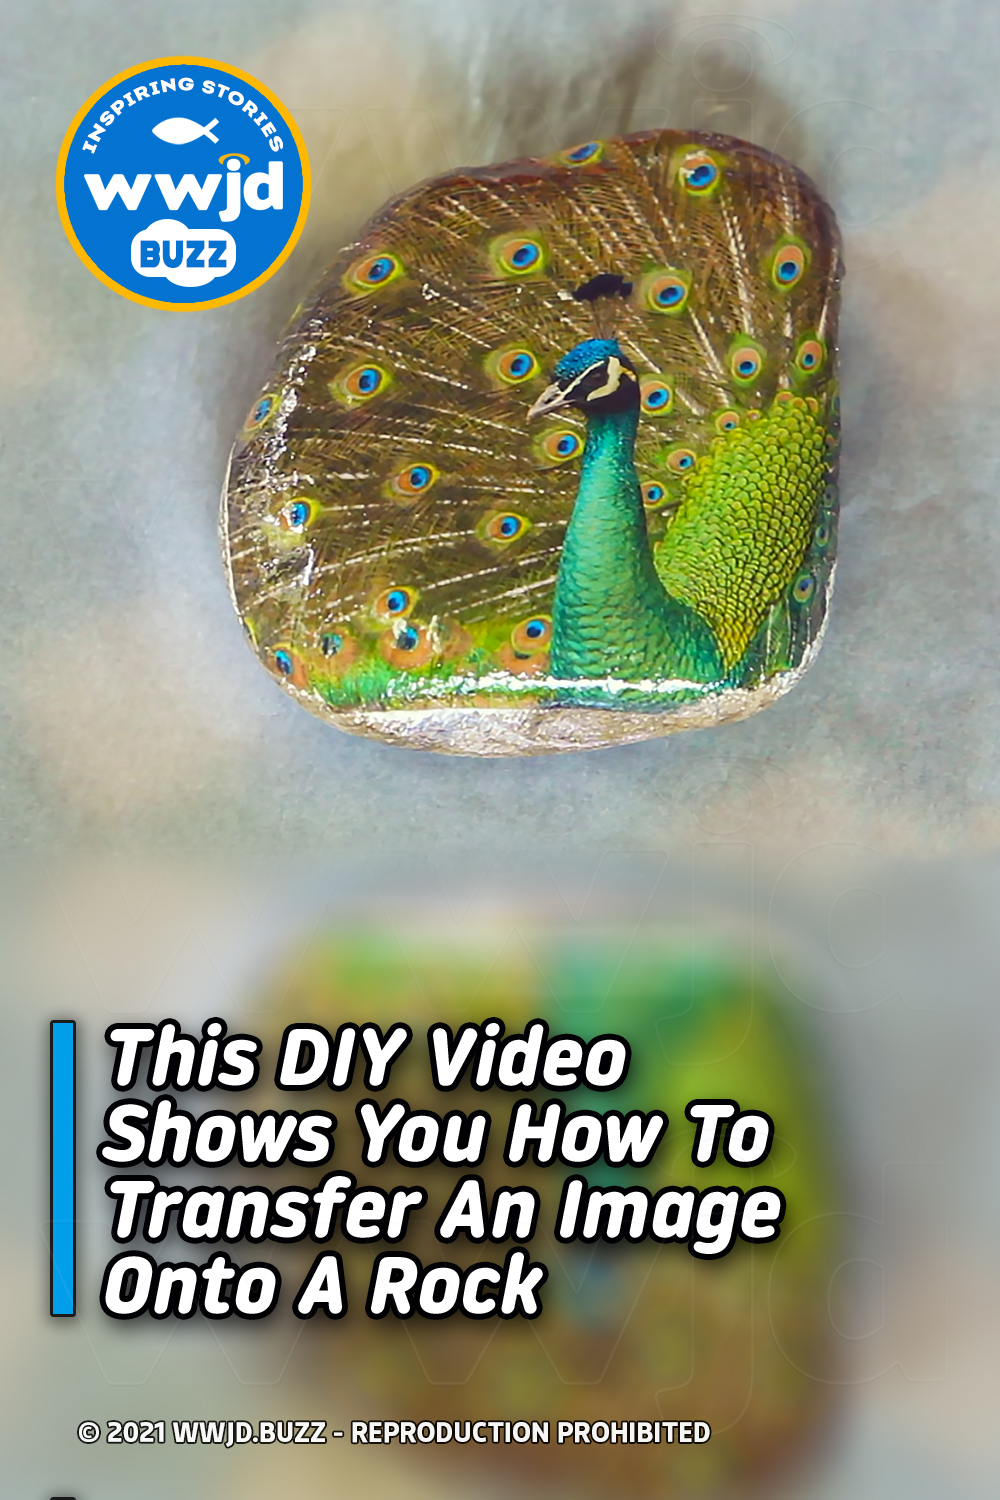 This DIY Video Shows You How To Transfer An Image Onto A Rock